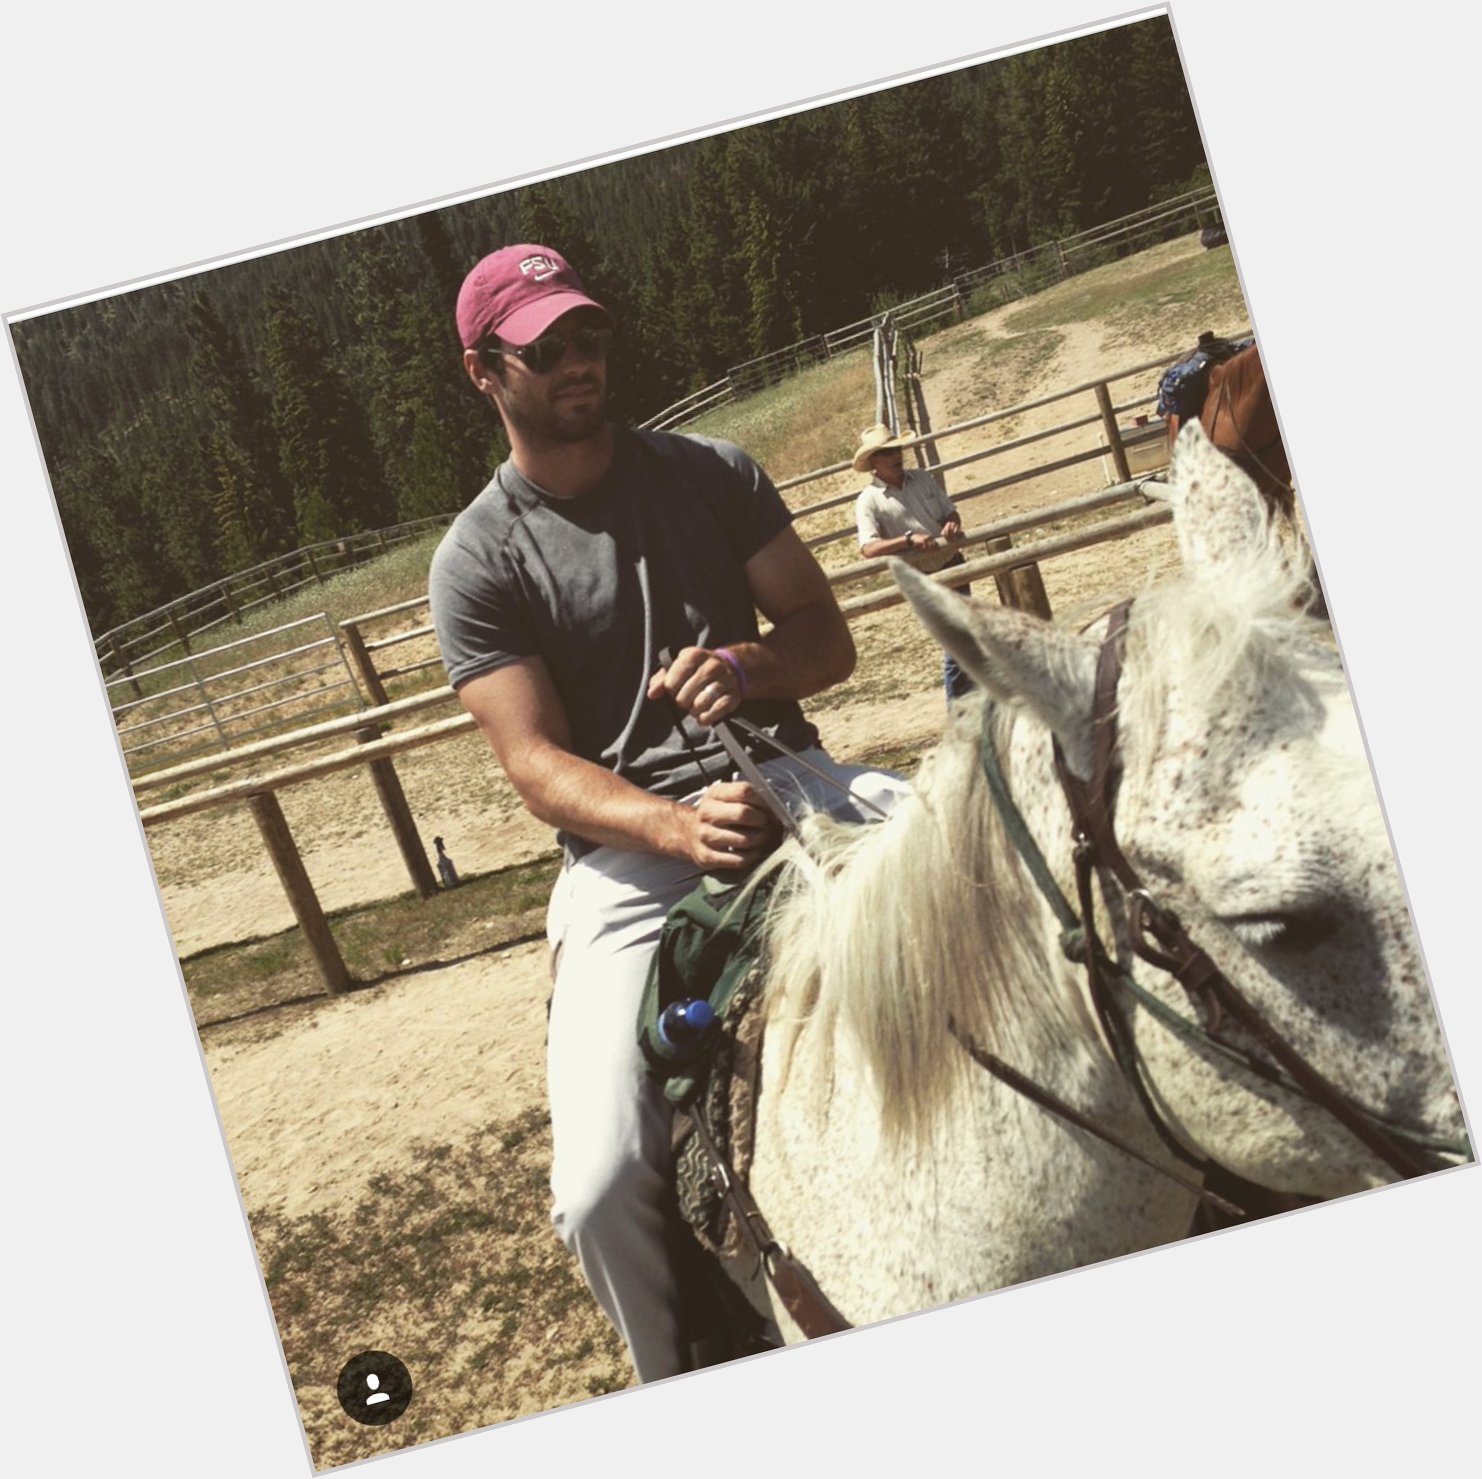 Christian Ponder on a horse. I literally cannot. Happy birthday,   